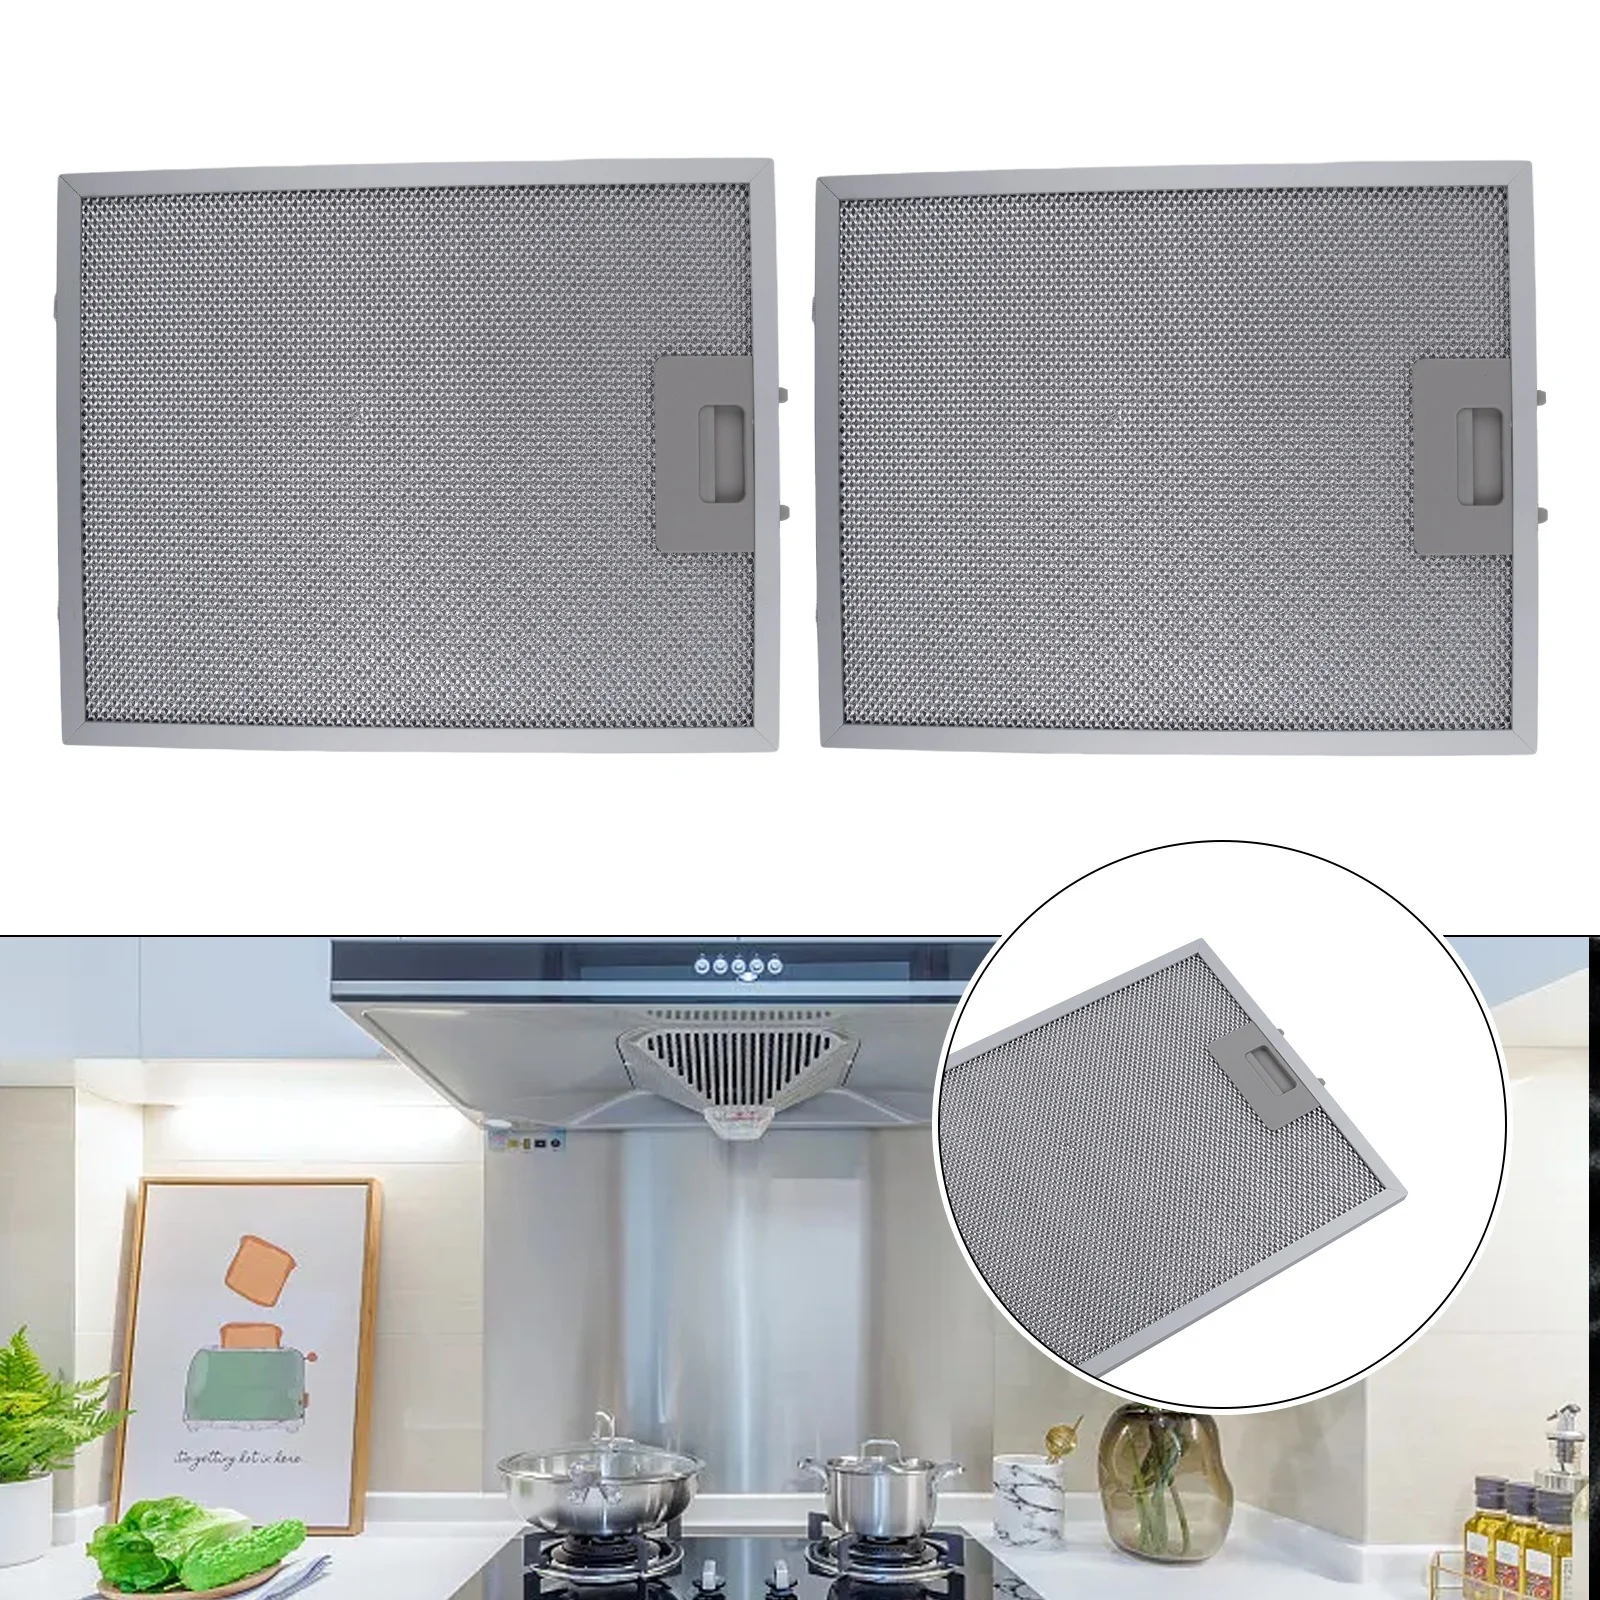 

For Range Hood Filter 2PCS 320x260x9mm Aluminized Grease Parts Stainless Steel Brand New Durable And Practical